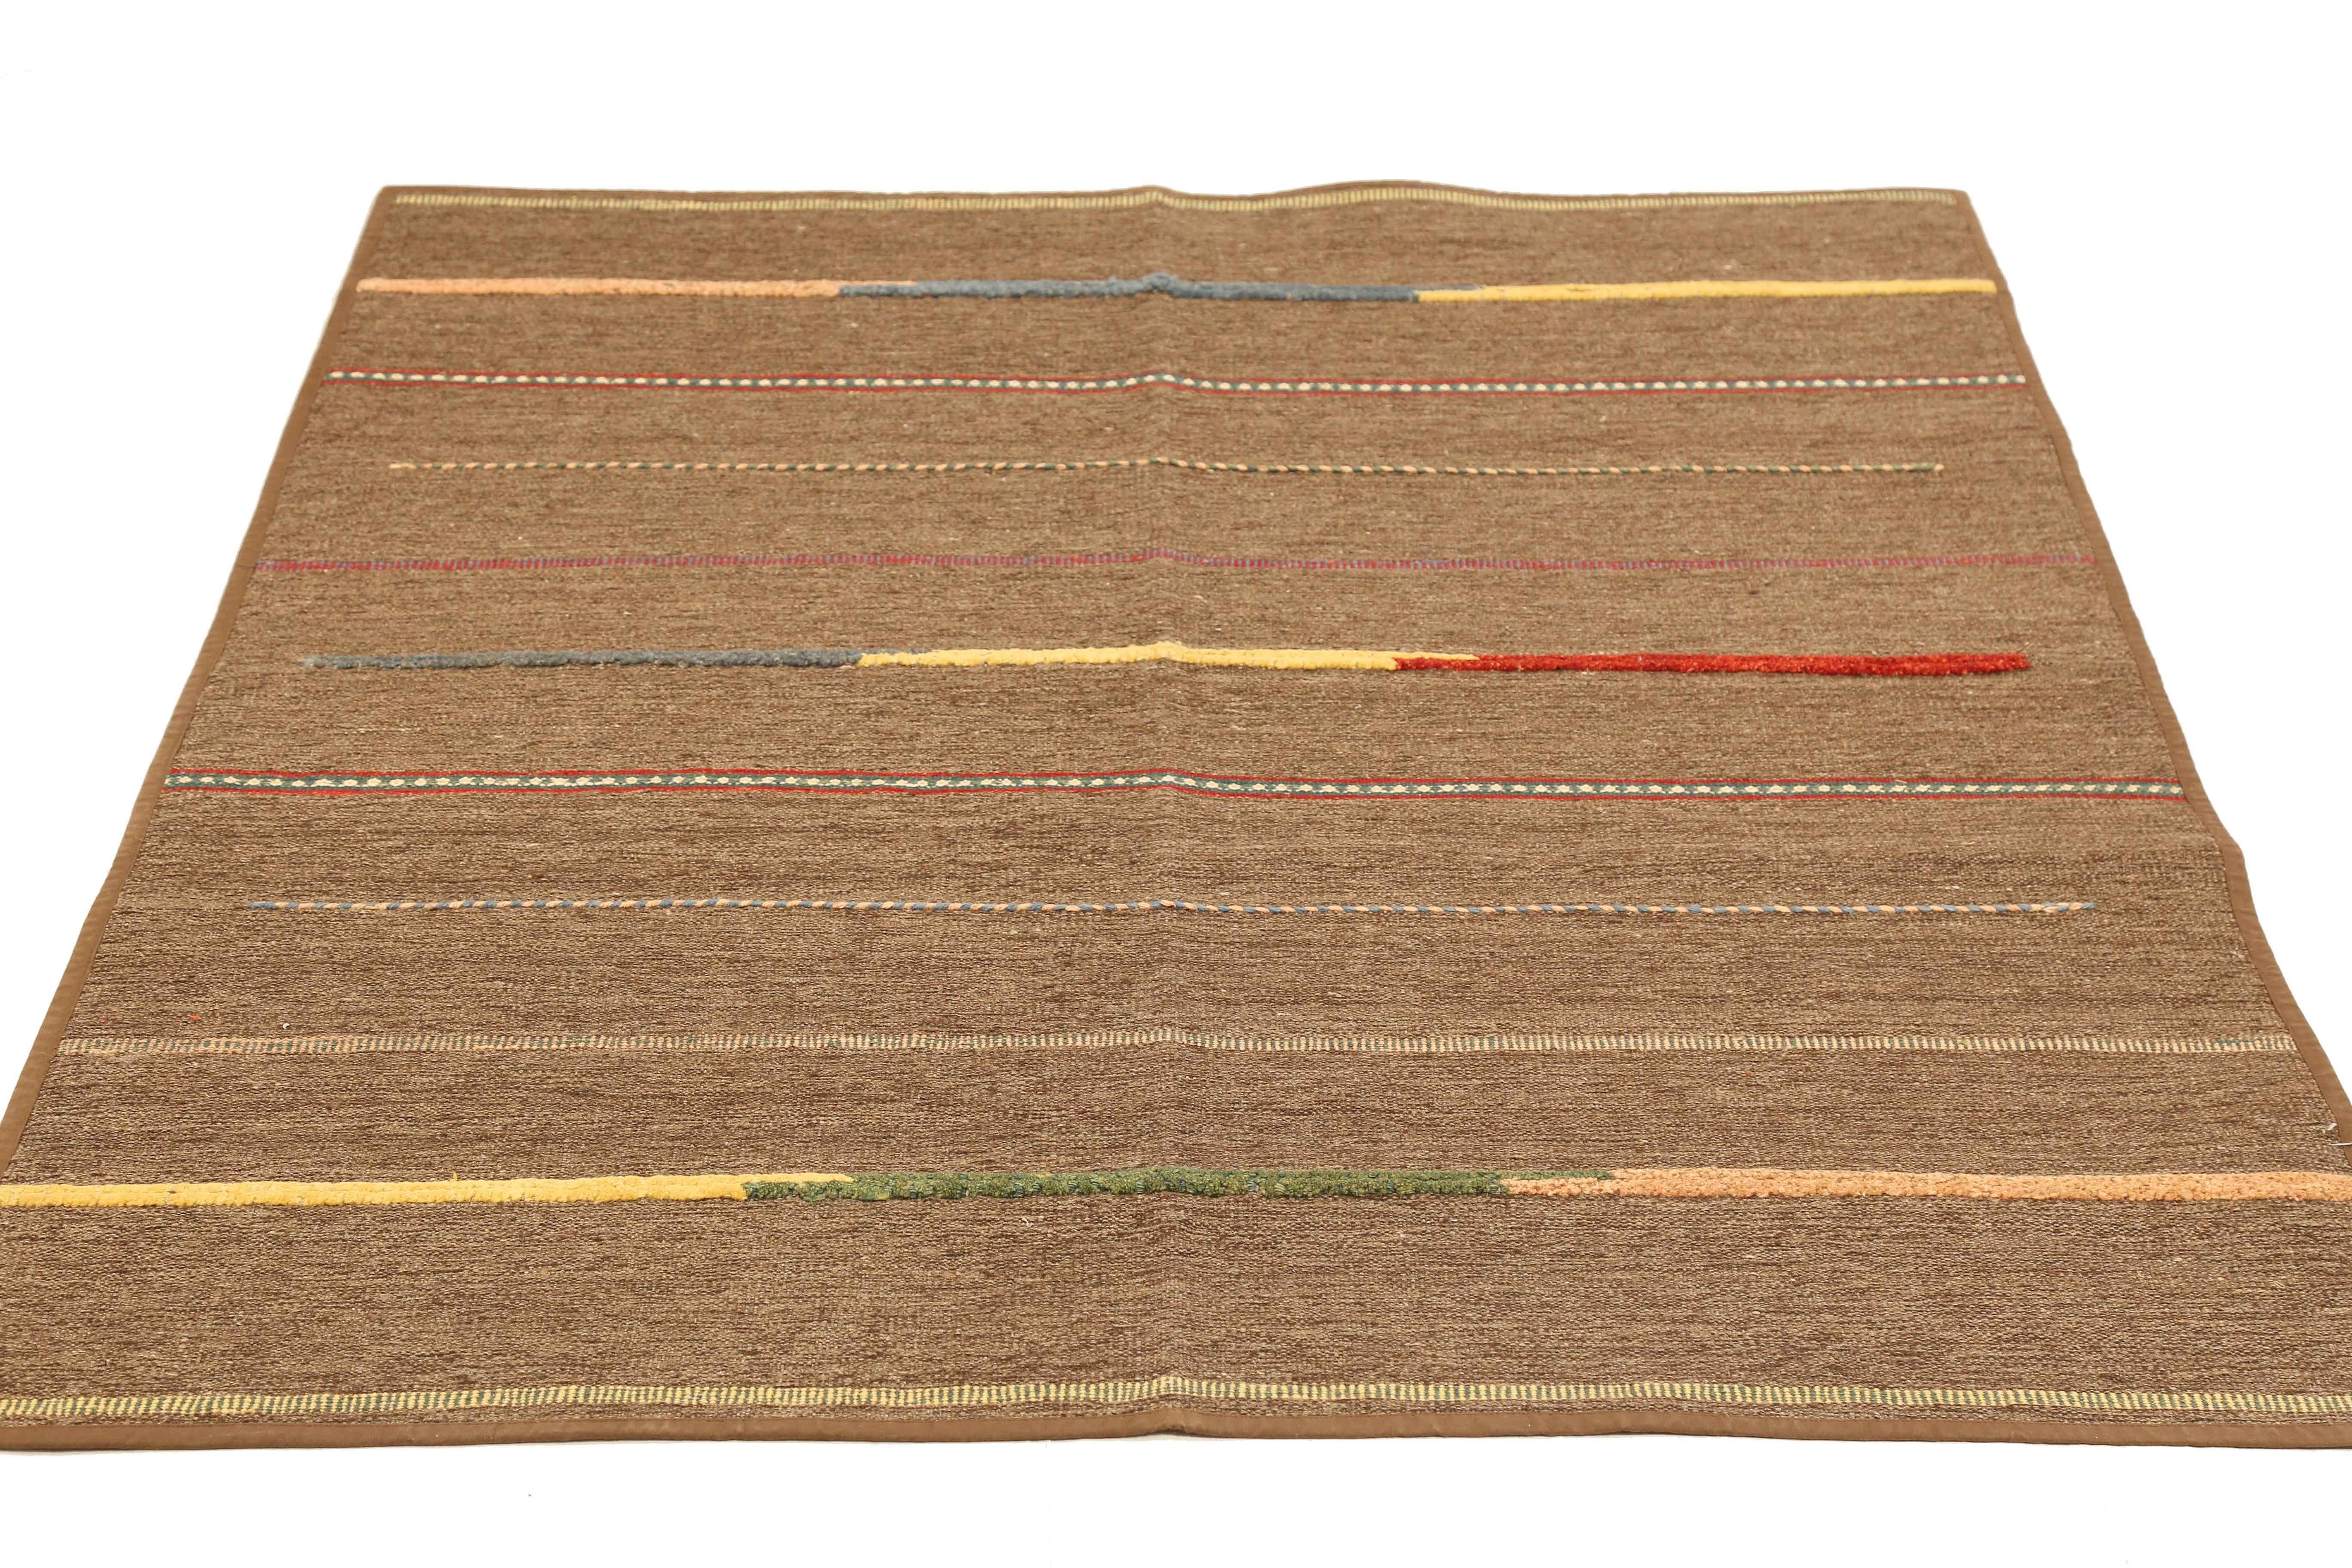 Modern Turkish rug handwoven from the finest sheep’s wool and colored with all-natural vegetable dyes that are safe for humans and pets. It’s a traditional Patch Kilim flat-weave design featuring colored stripes on a brown field. It’s a stunning